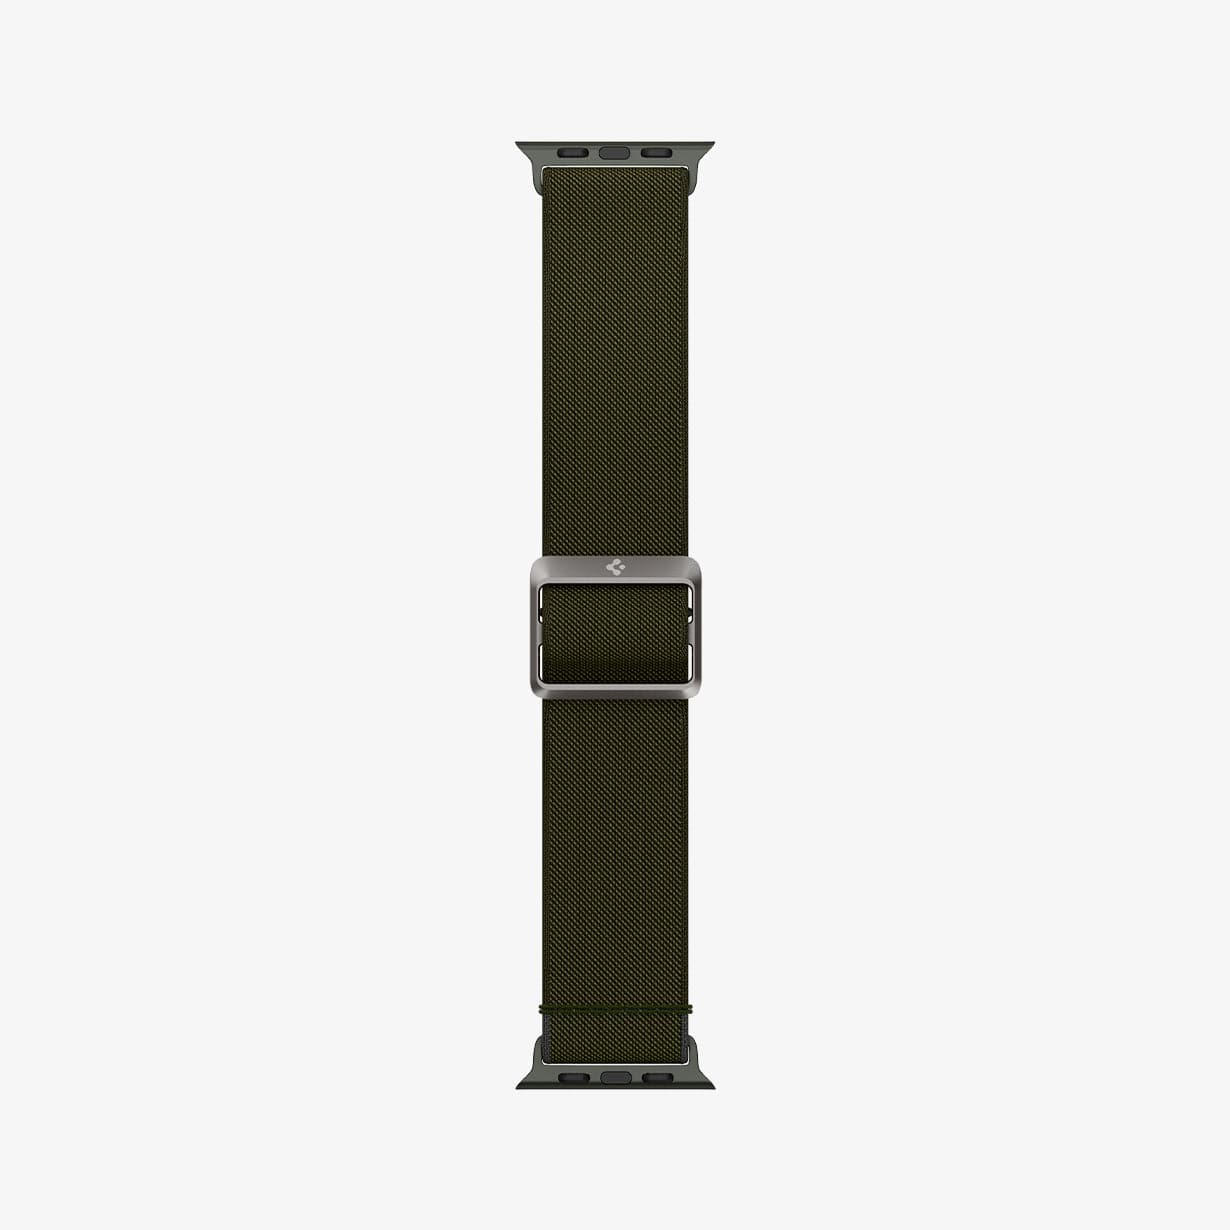 AMP02292 - Apple Watch Series (Apple Watch (41mm)/Apple Watch (38mm)) Watch Band Lite Fit in khaki showing the watch band laid out flat